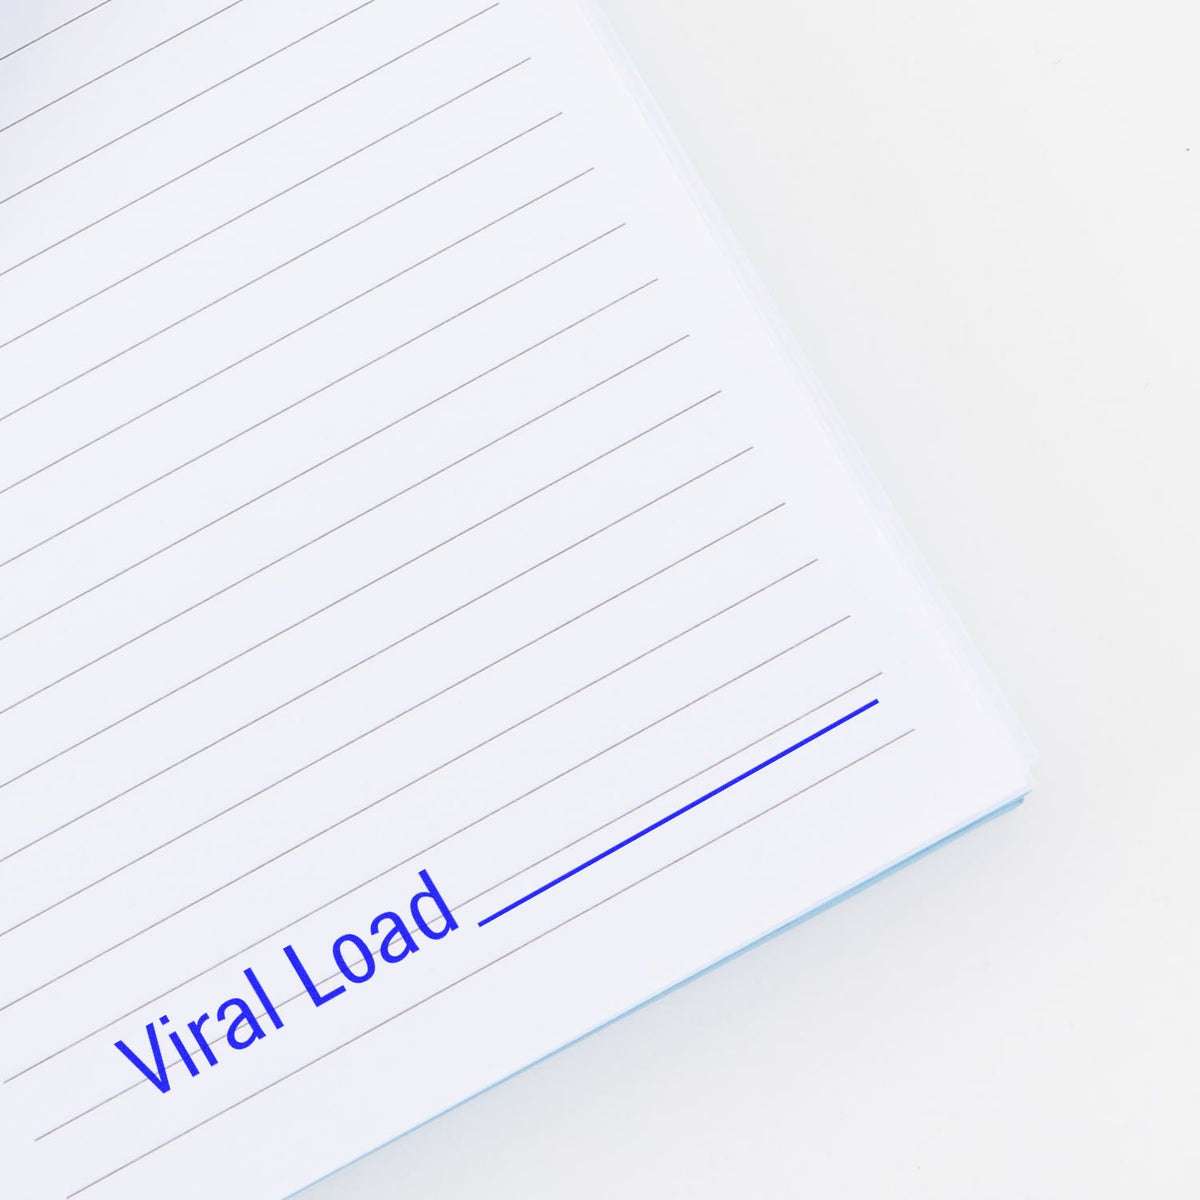 Viral Load Rubber Stamp In Use Photo